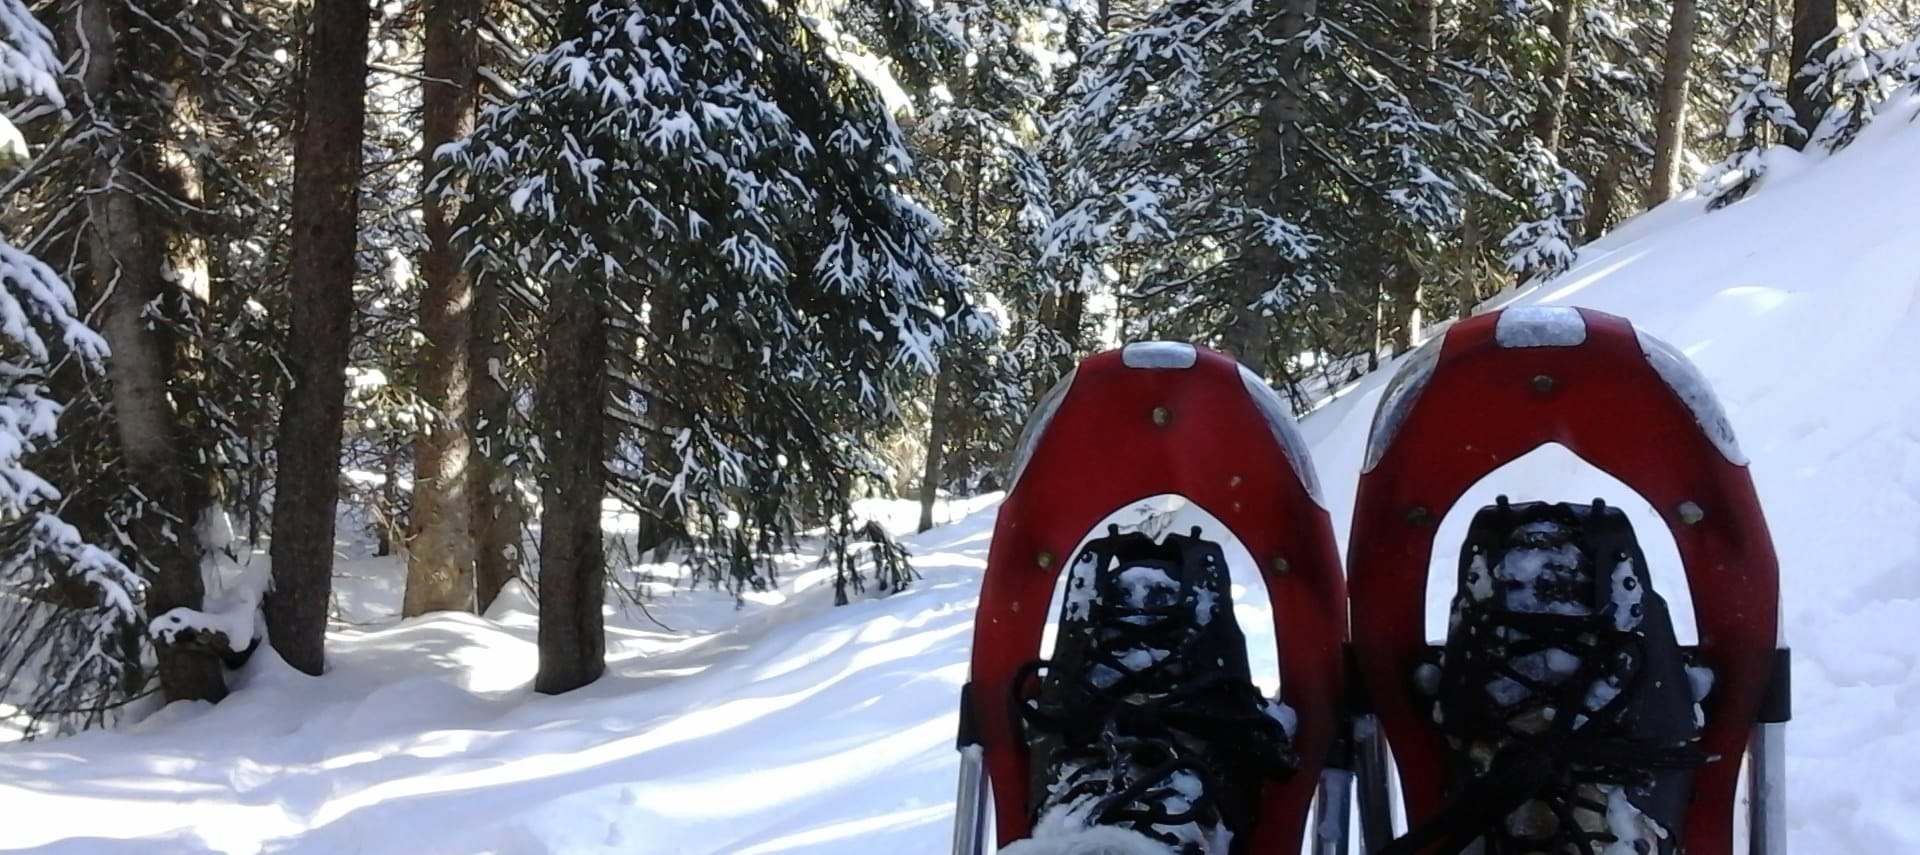 Snowshoe in forest